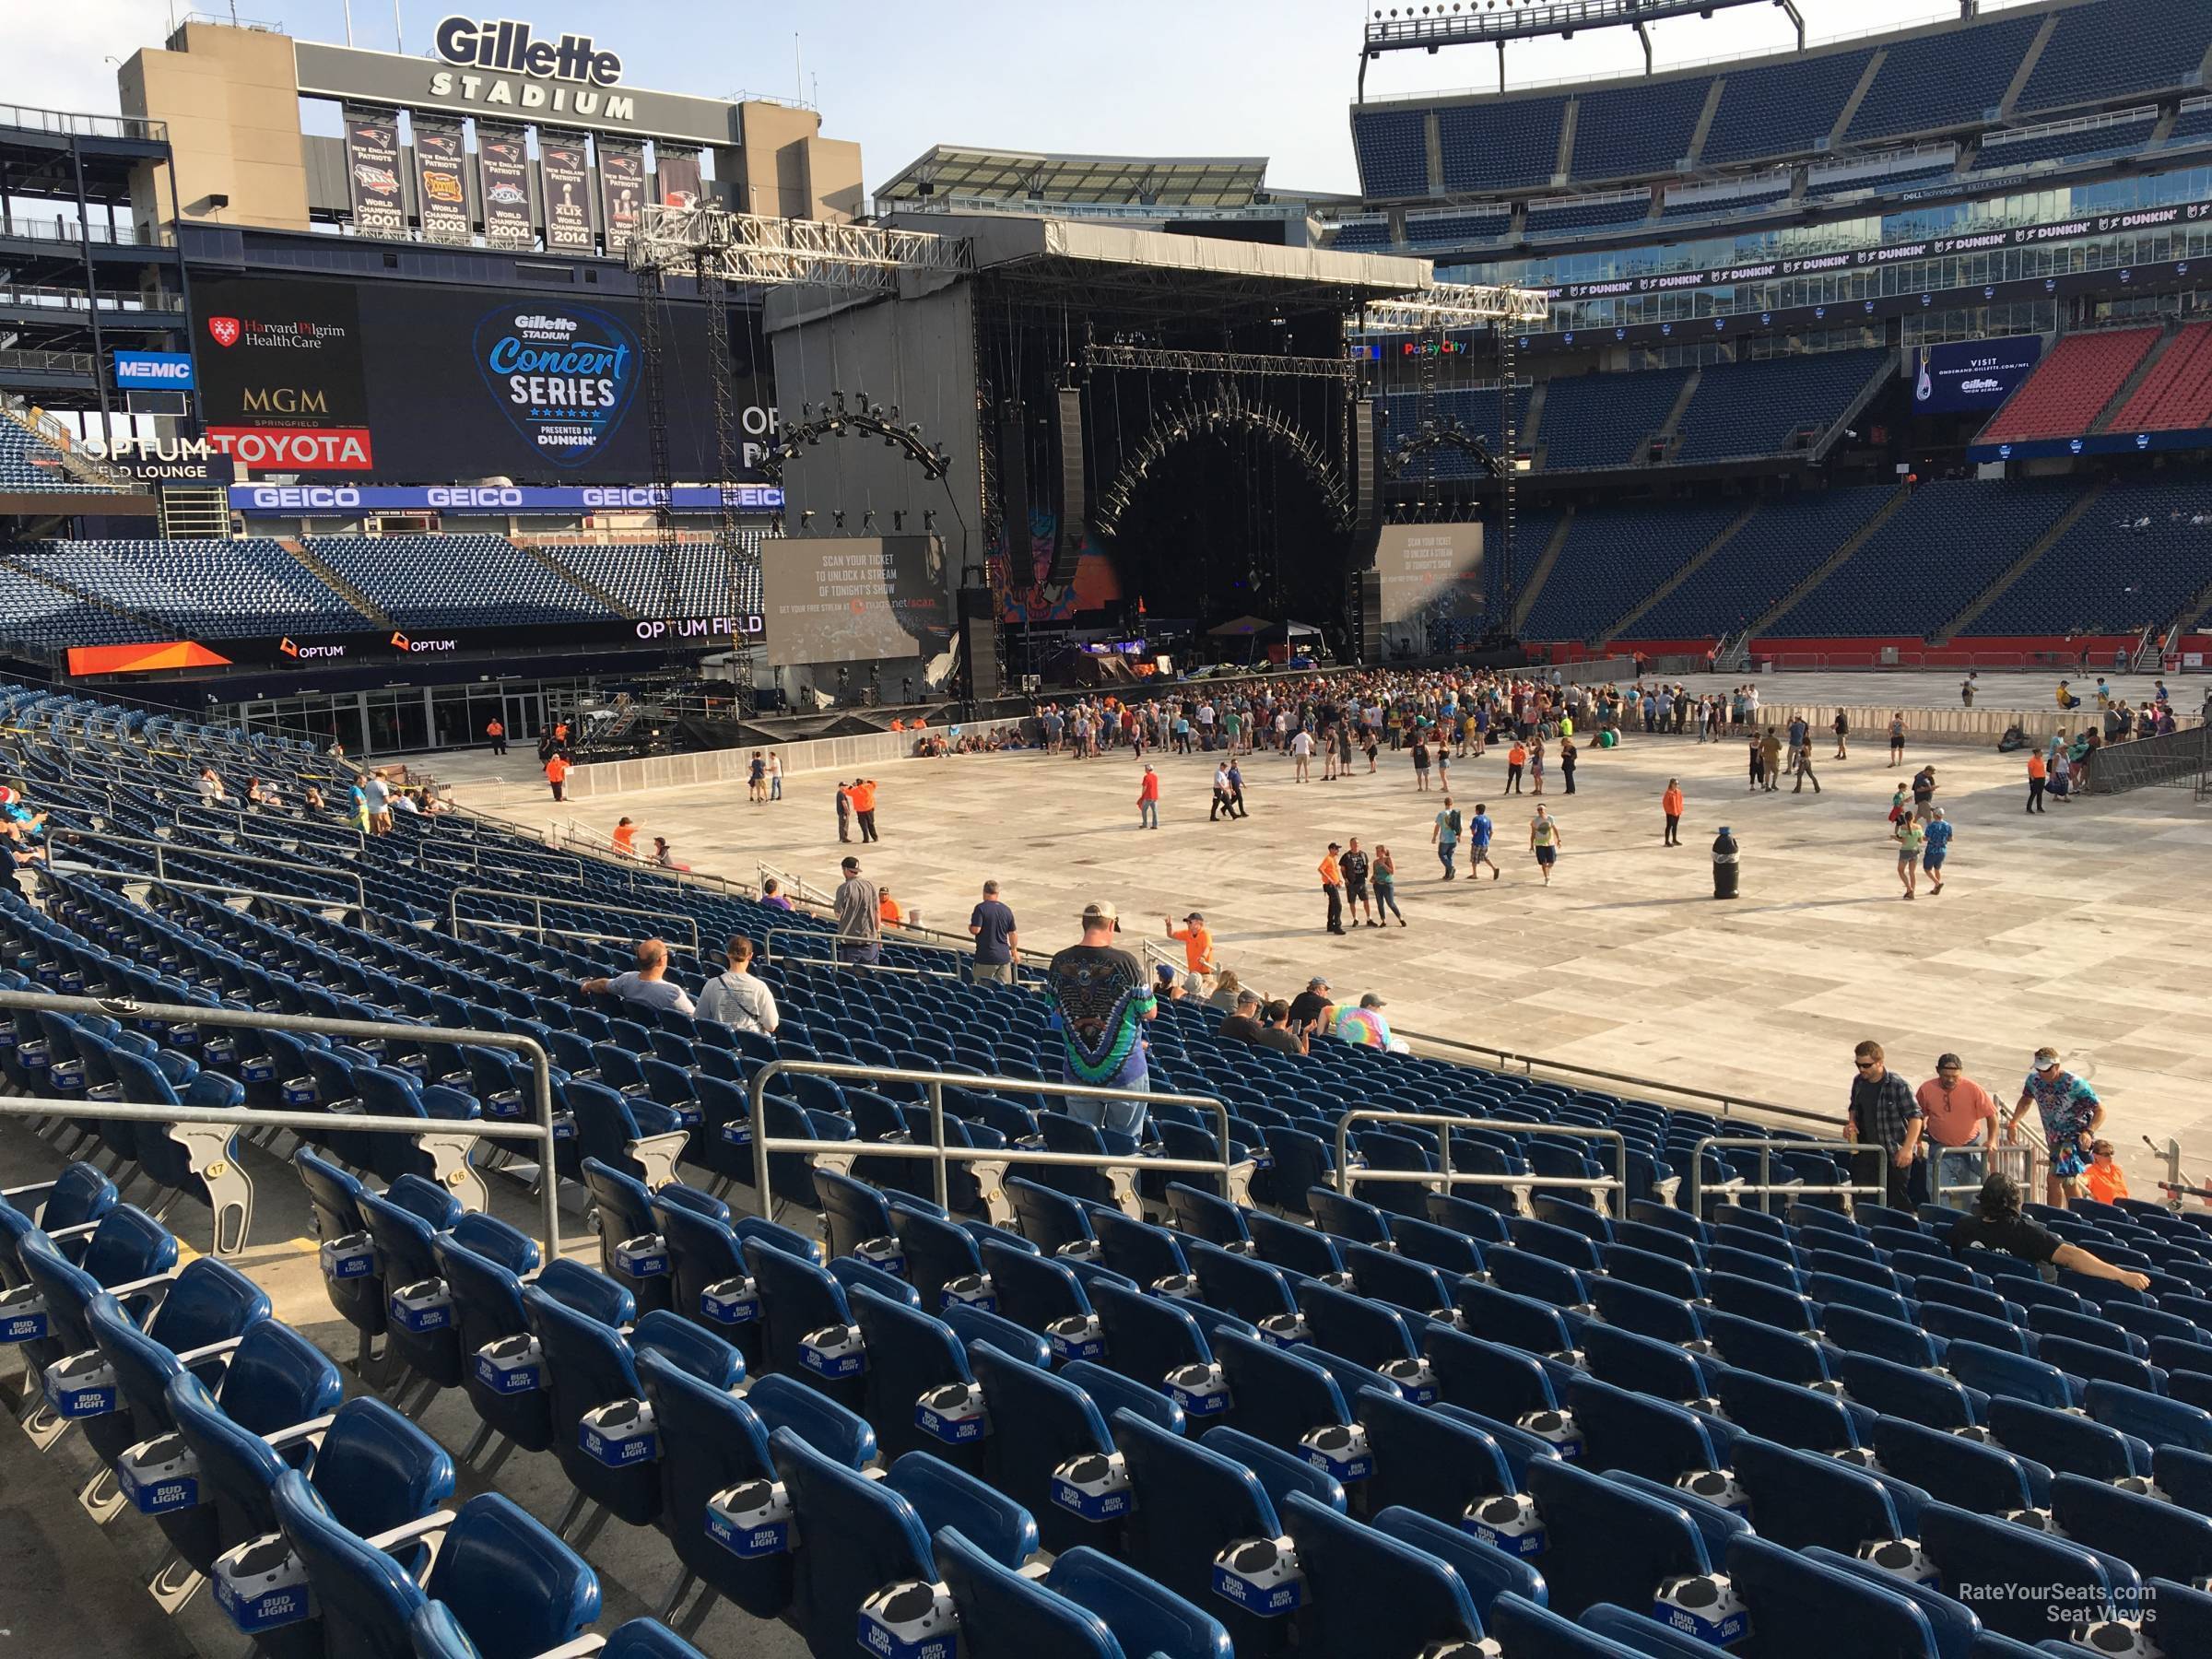 Gillette Stadium Section 108 Concert Seating - RateYourSeats.com